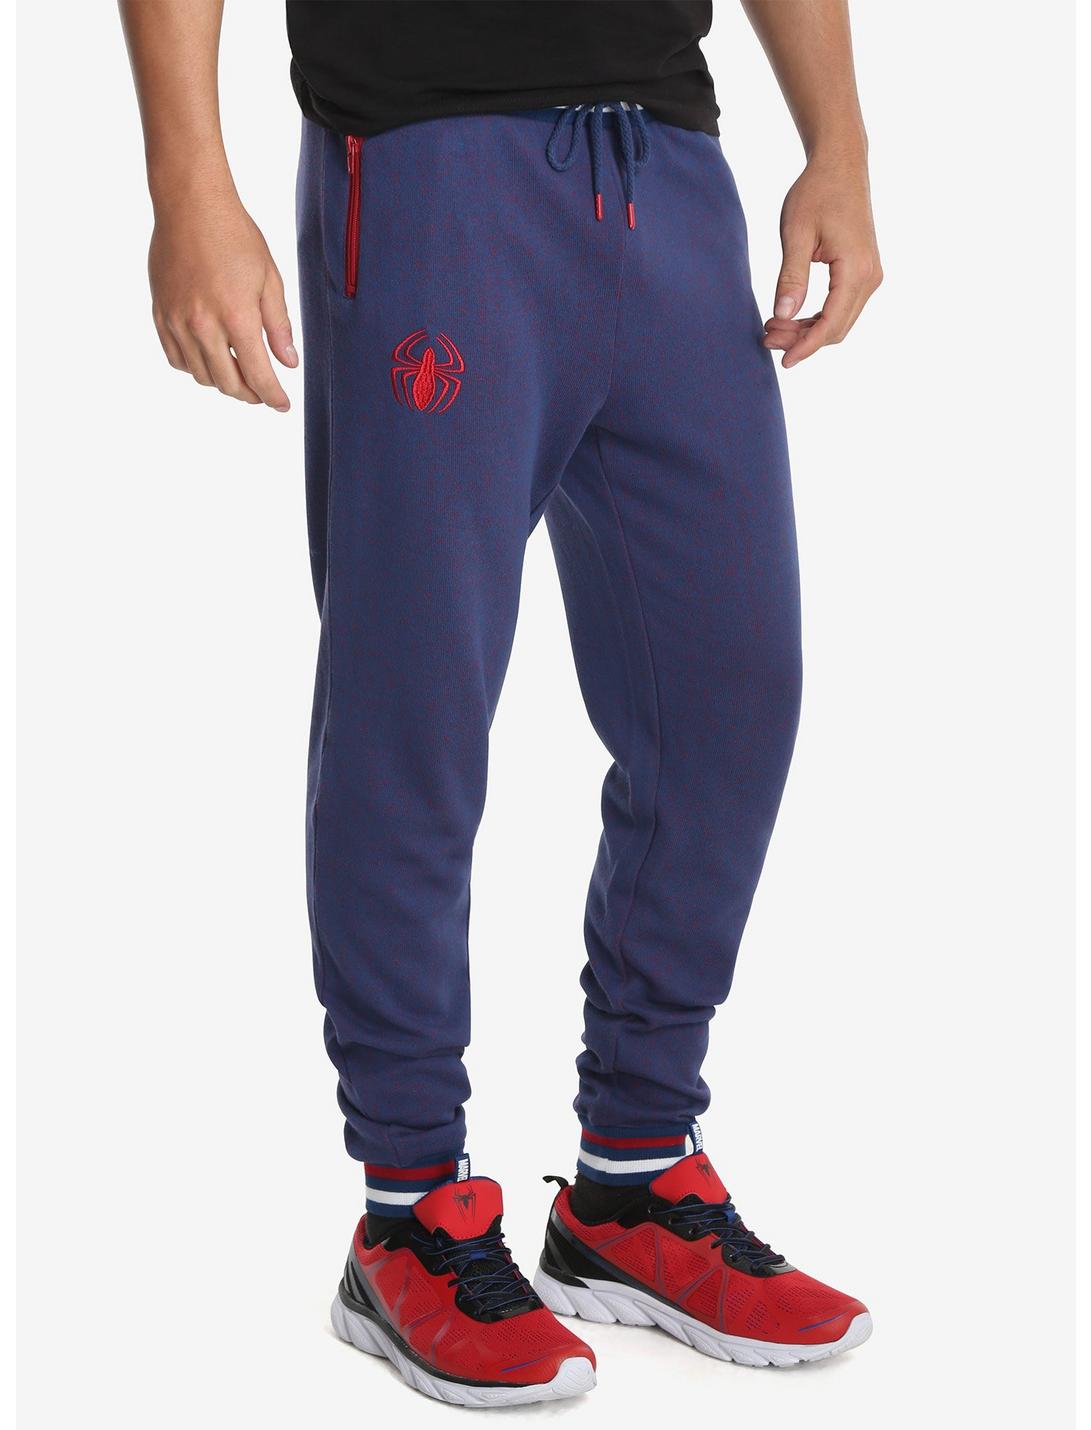 Marvel Spider-Man Homecoming Collection Jogger Pants, NAVY, hi-res